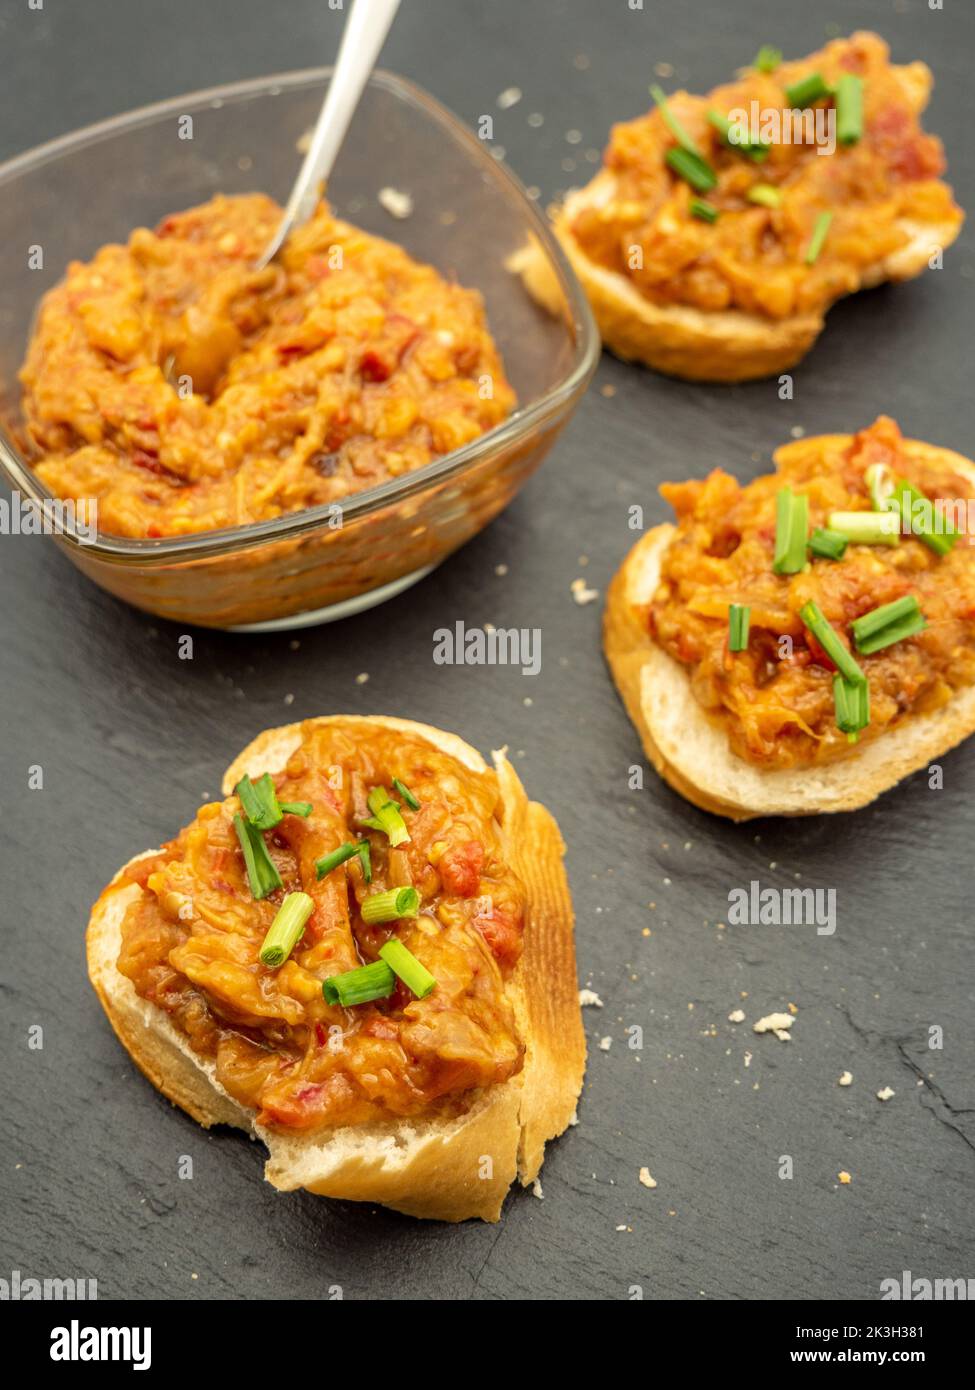 zacusca, romanian vegetable spread, with roasted eggplant, onions tomato paste and roasted red peppers Stock Photo